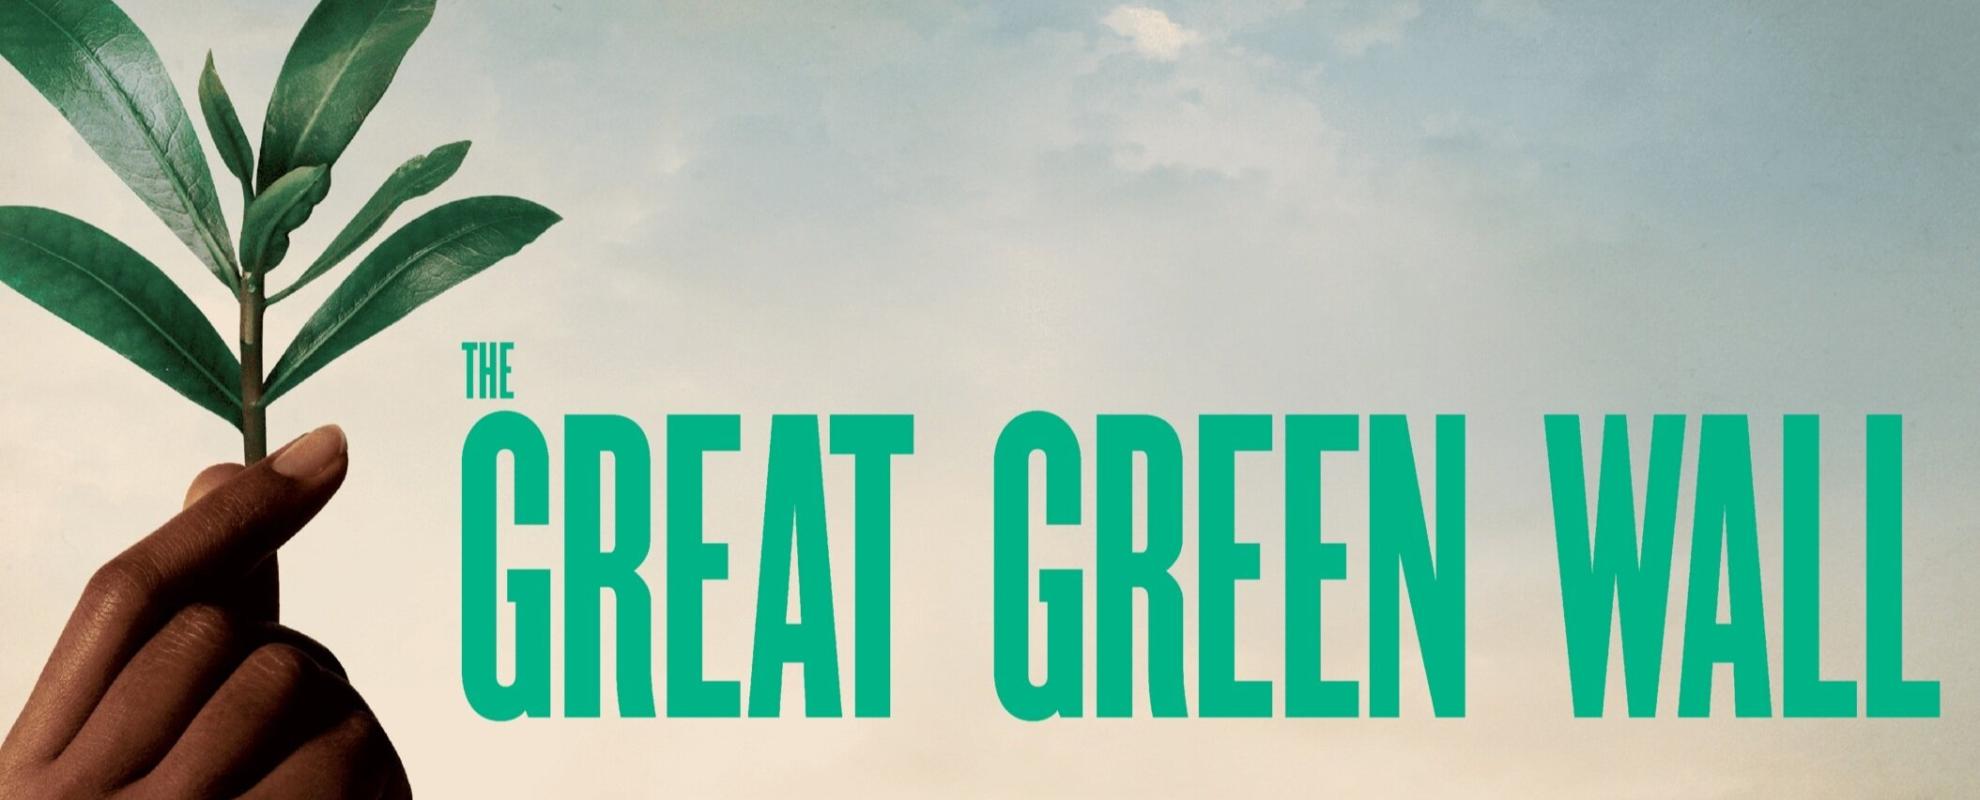 Poster The Great Green Wall